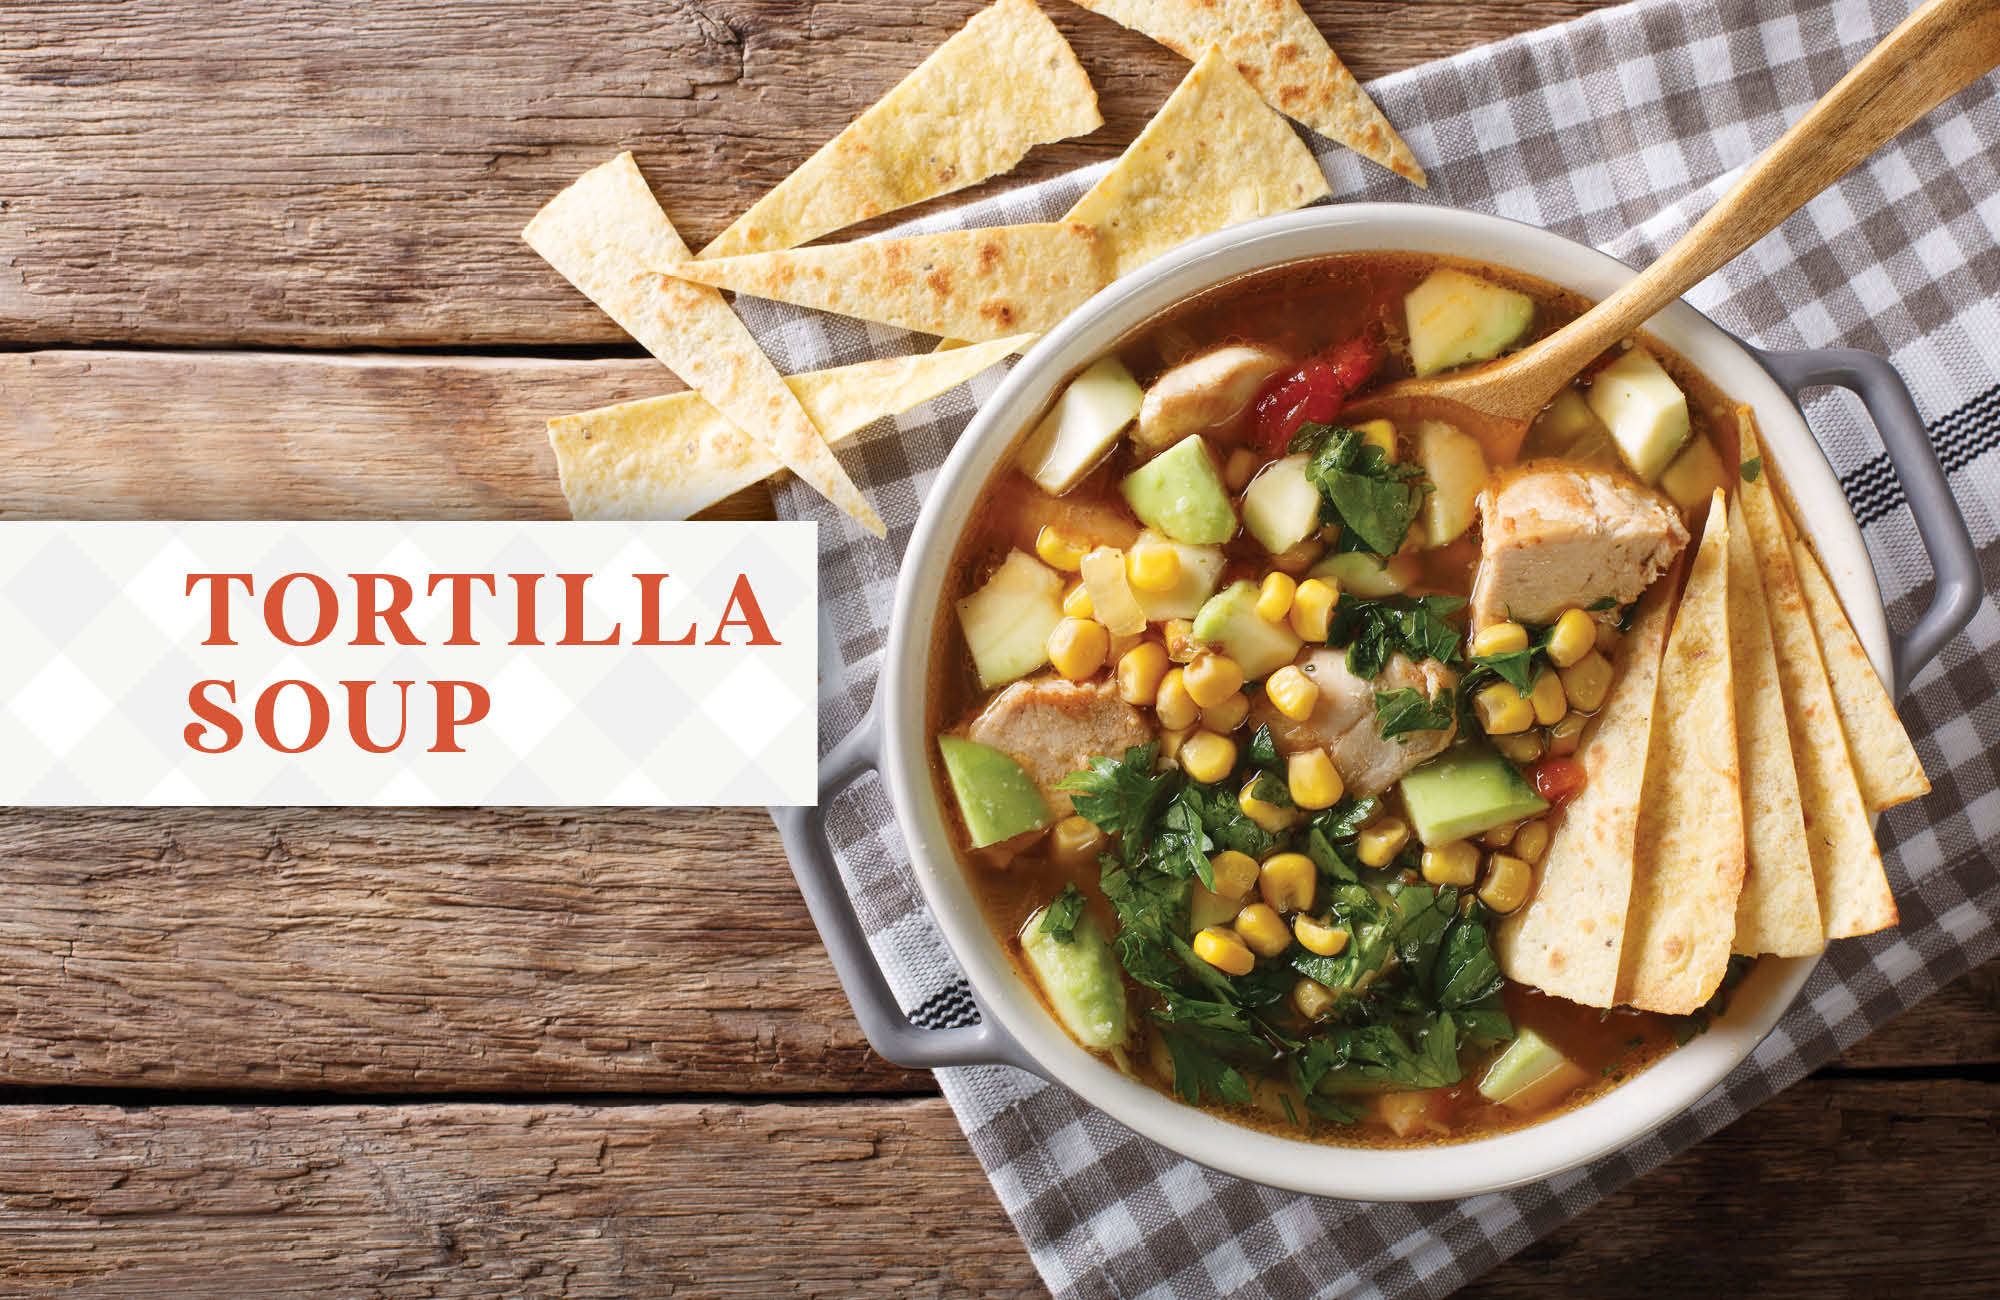 At Home Comfort Food: Easy Chicken Tortilla Soup